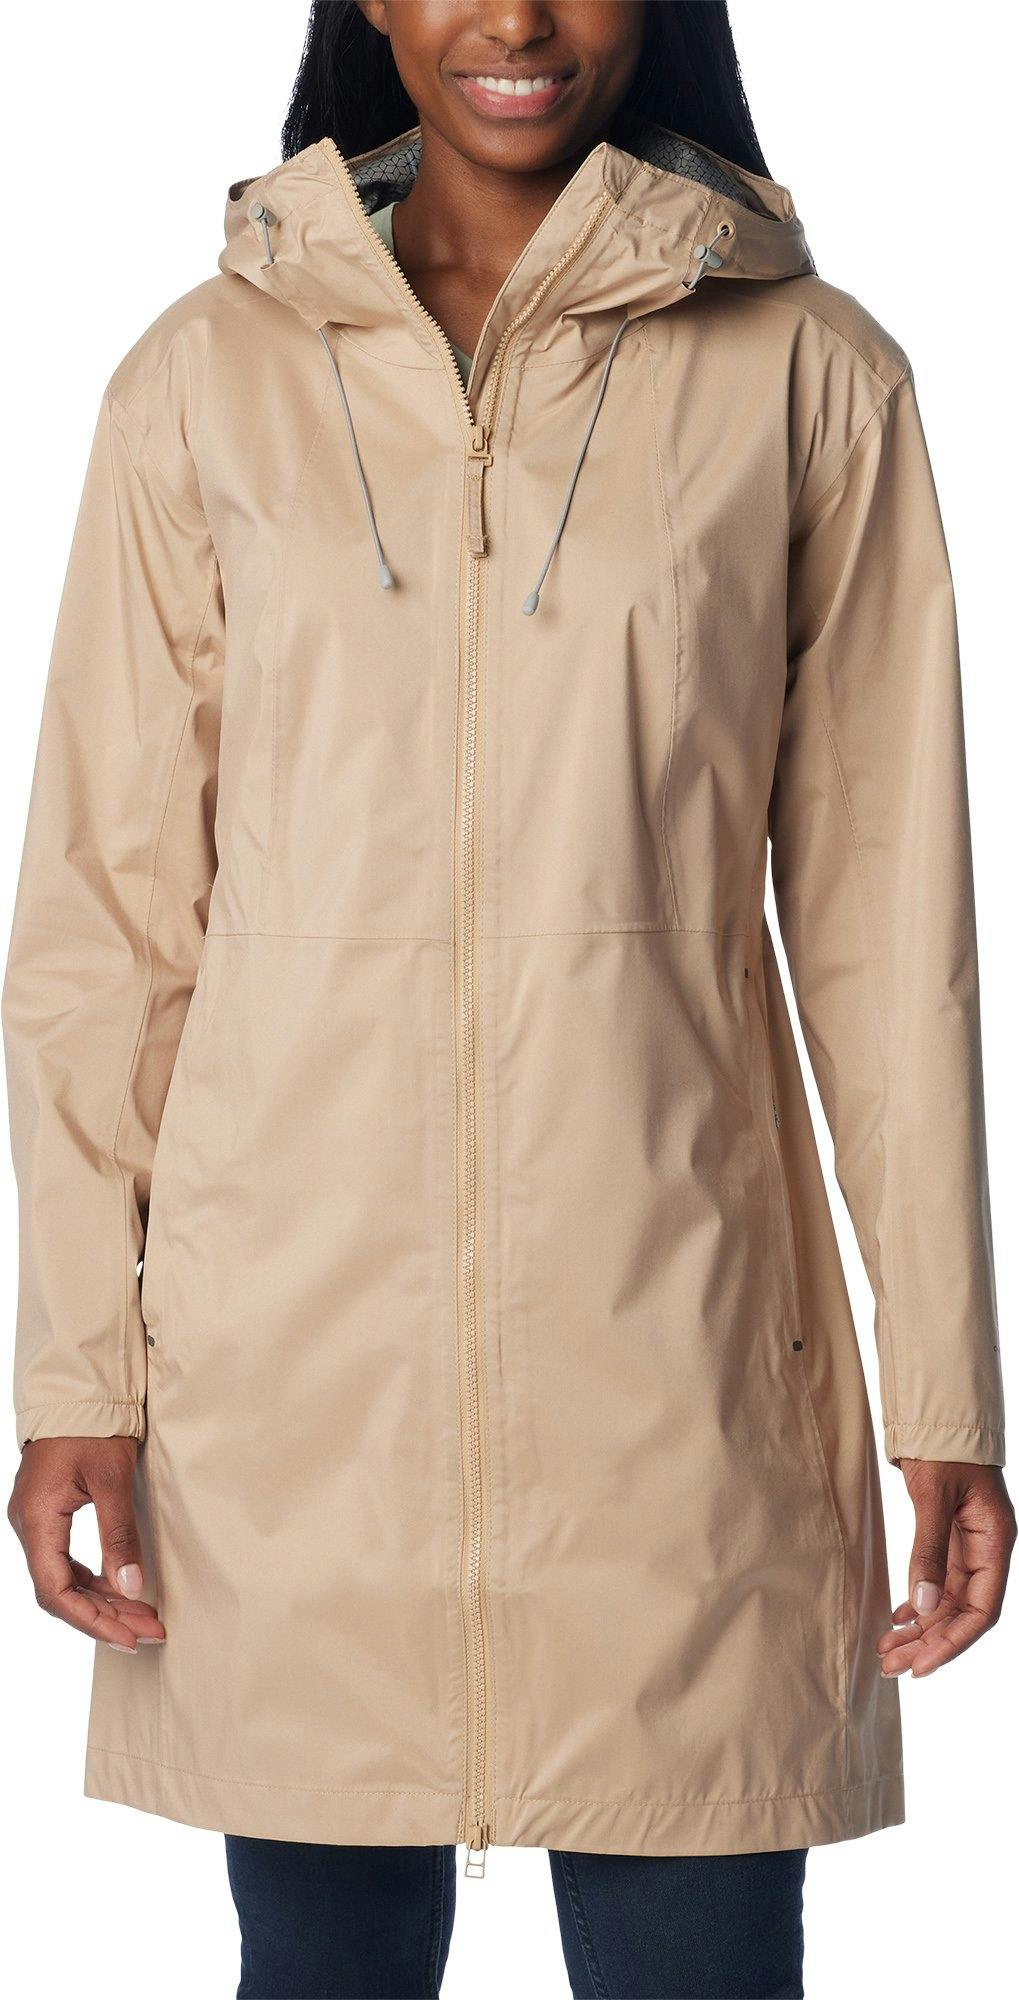 Product image for Weekend Adventure Long Shell Jacket - Women's